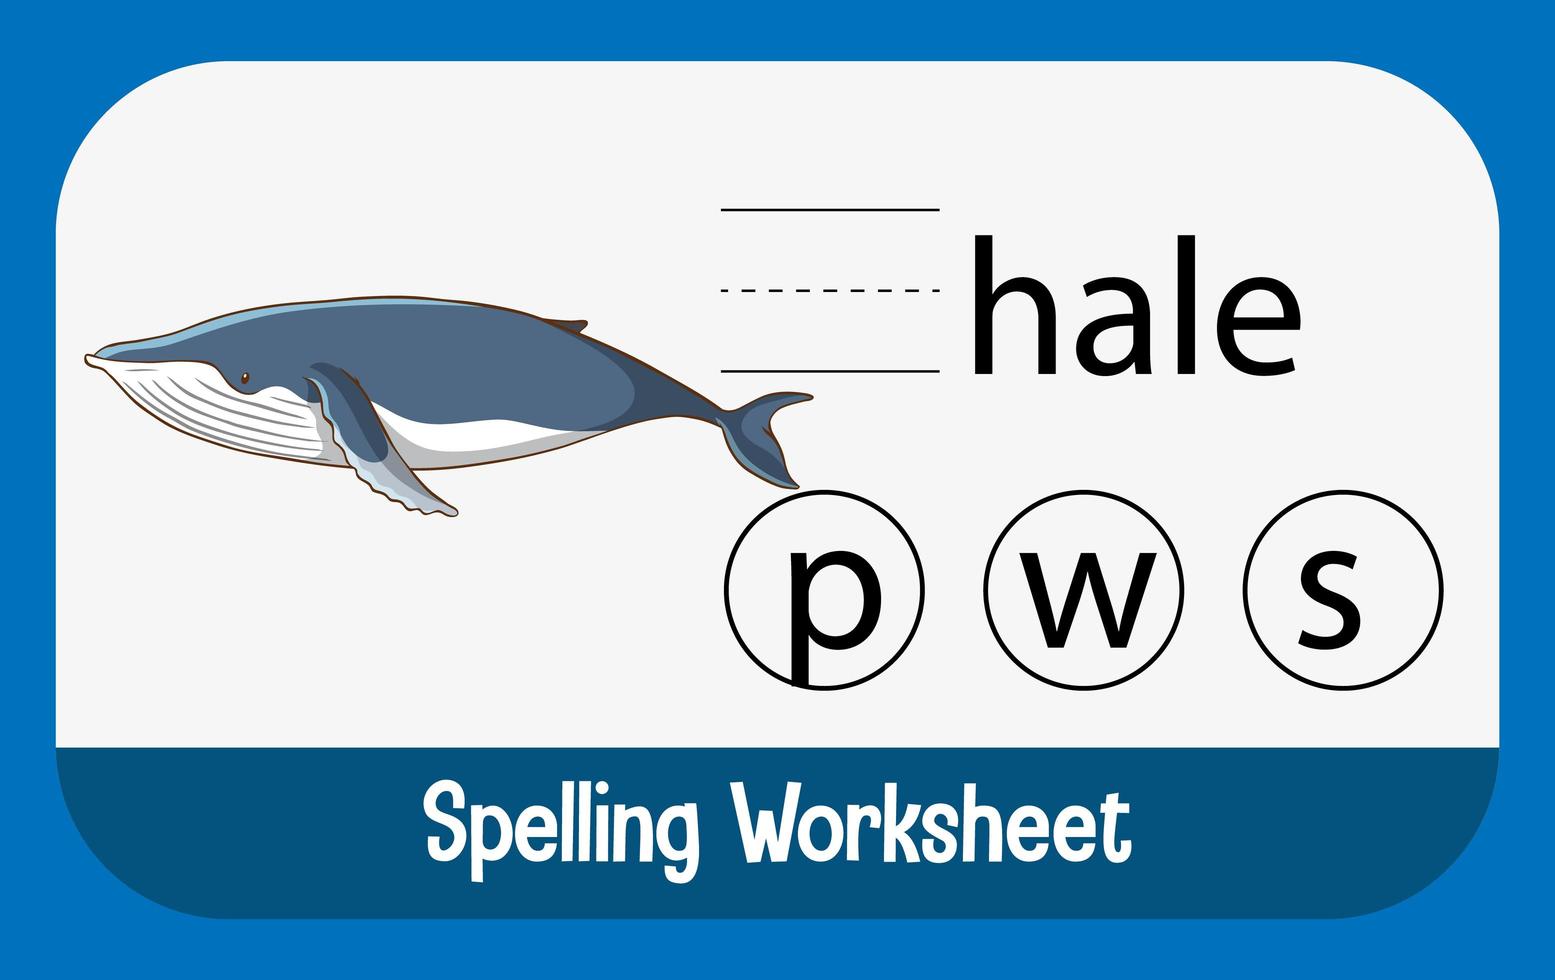 Find missing letter with whale vector